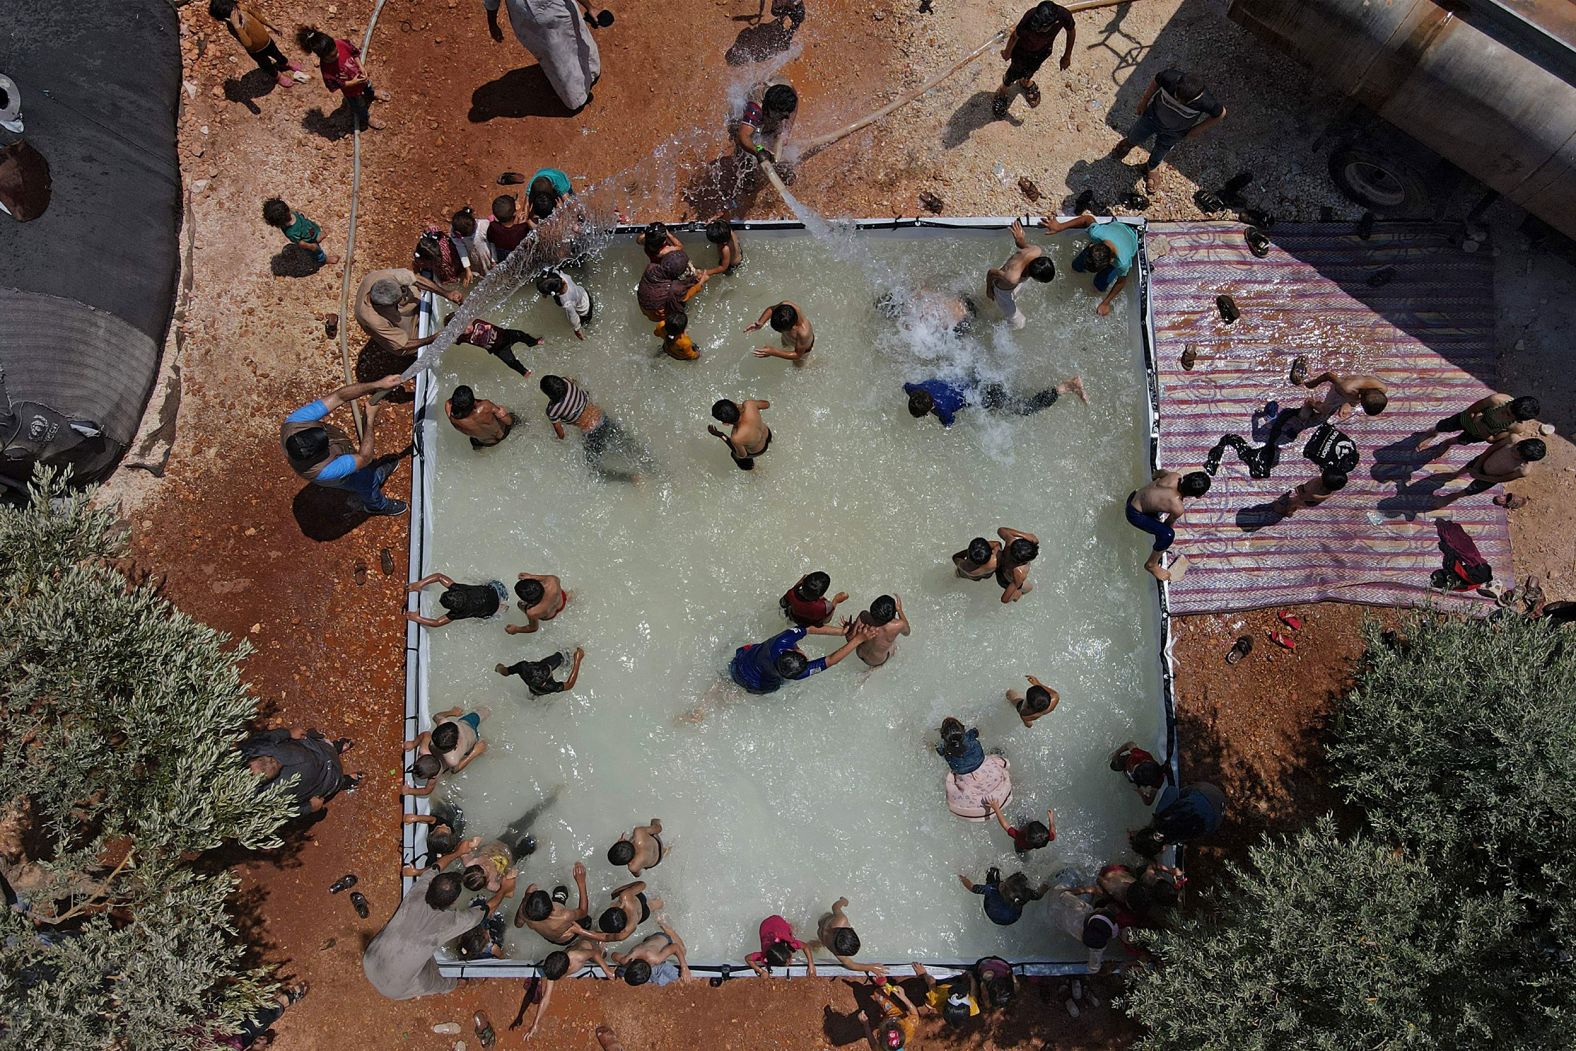 Children play in a portable swimming pool set up at a camp for displaced people in Kafr Yahmul, Syria, on Wednesday, August 10.